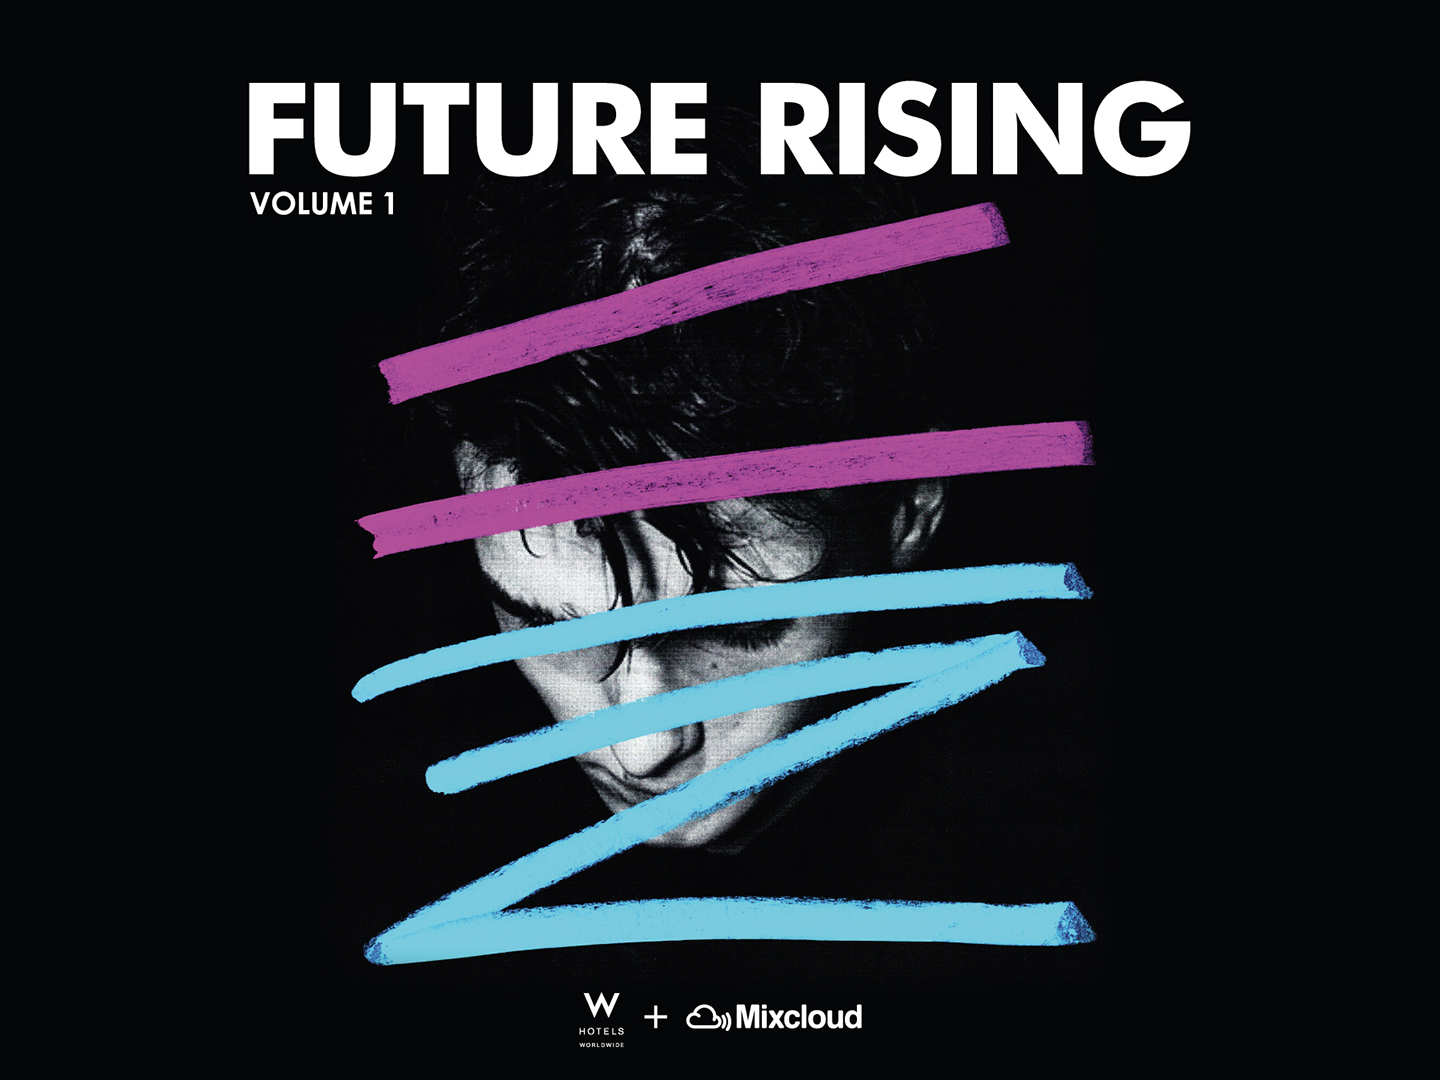 Mixcloud teams up with W Hotels to release FUTURE RISING Volume 1